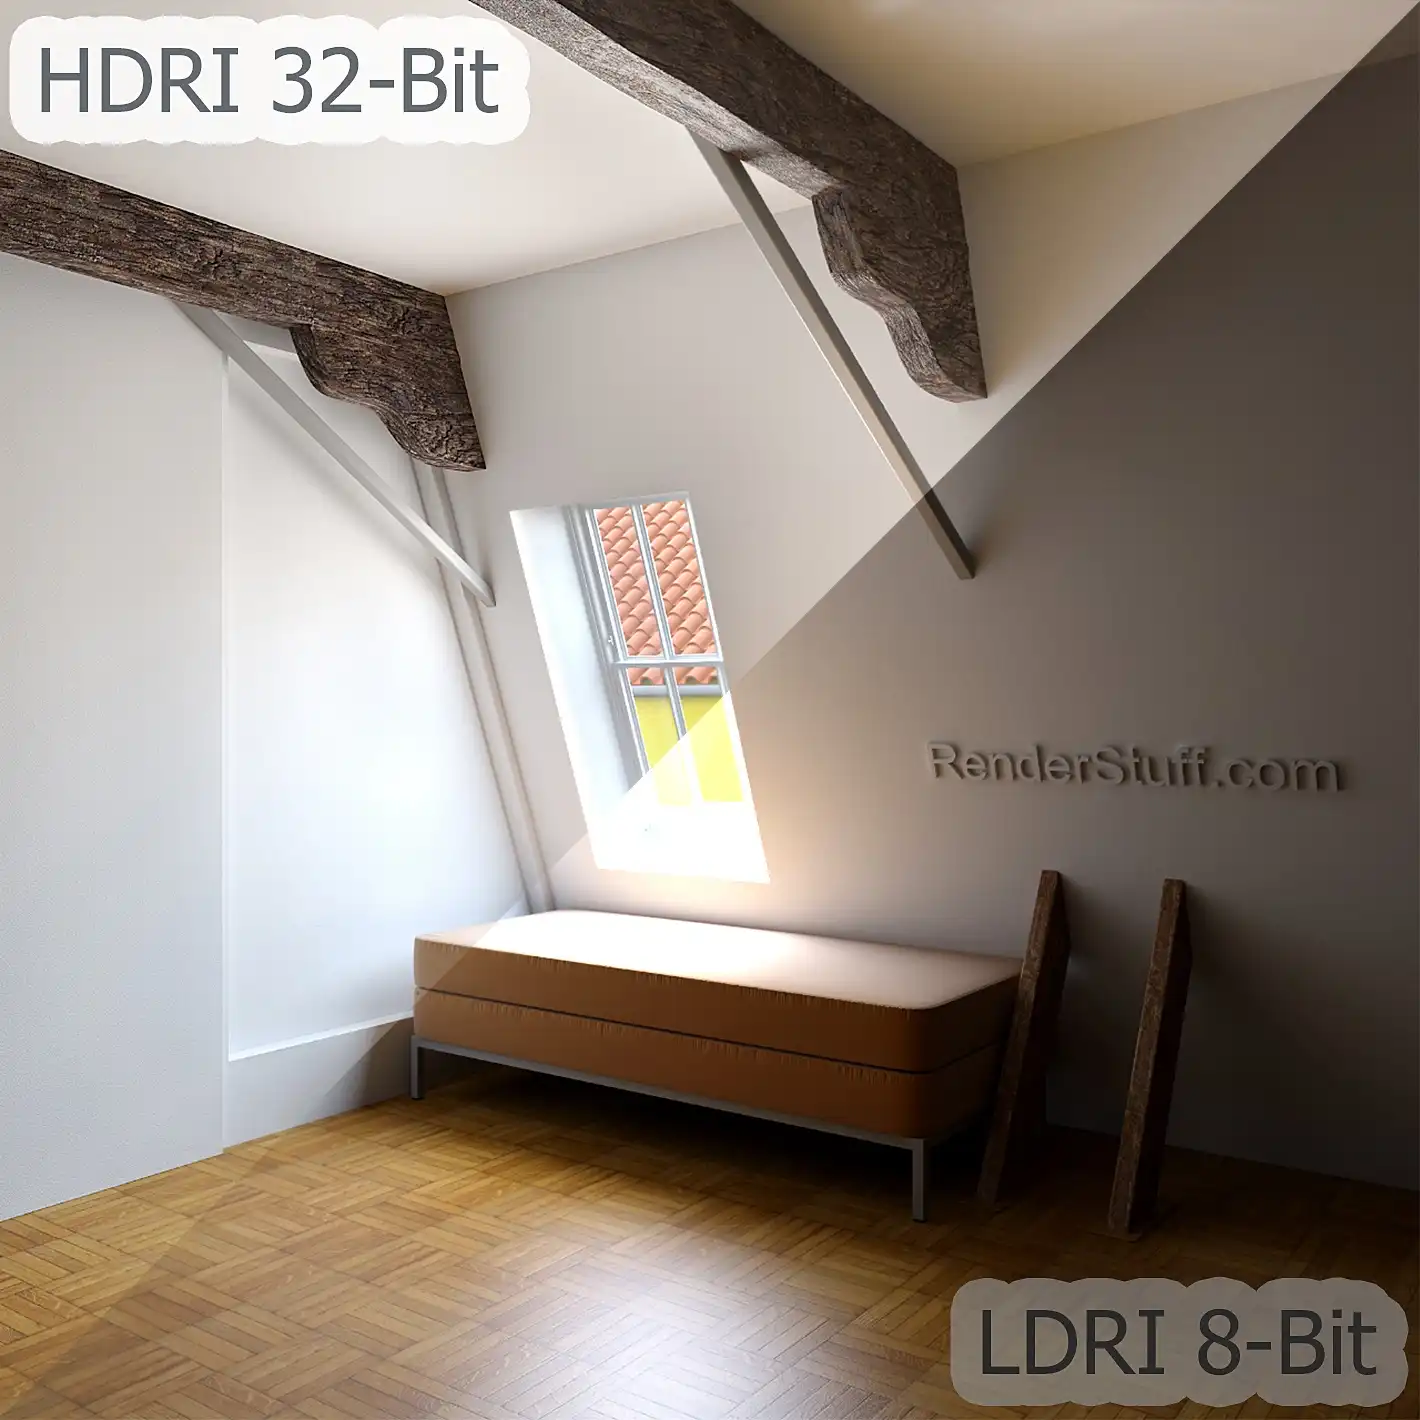 A guide to HDRI rendering and deep exposure editing of 32-bit images.